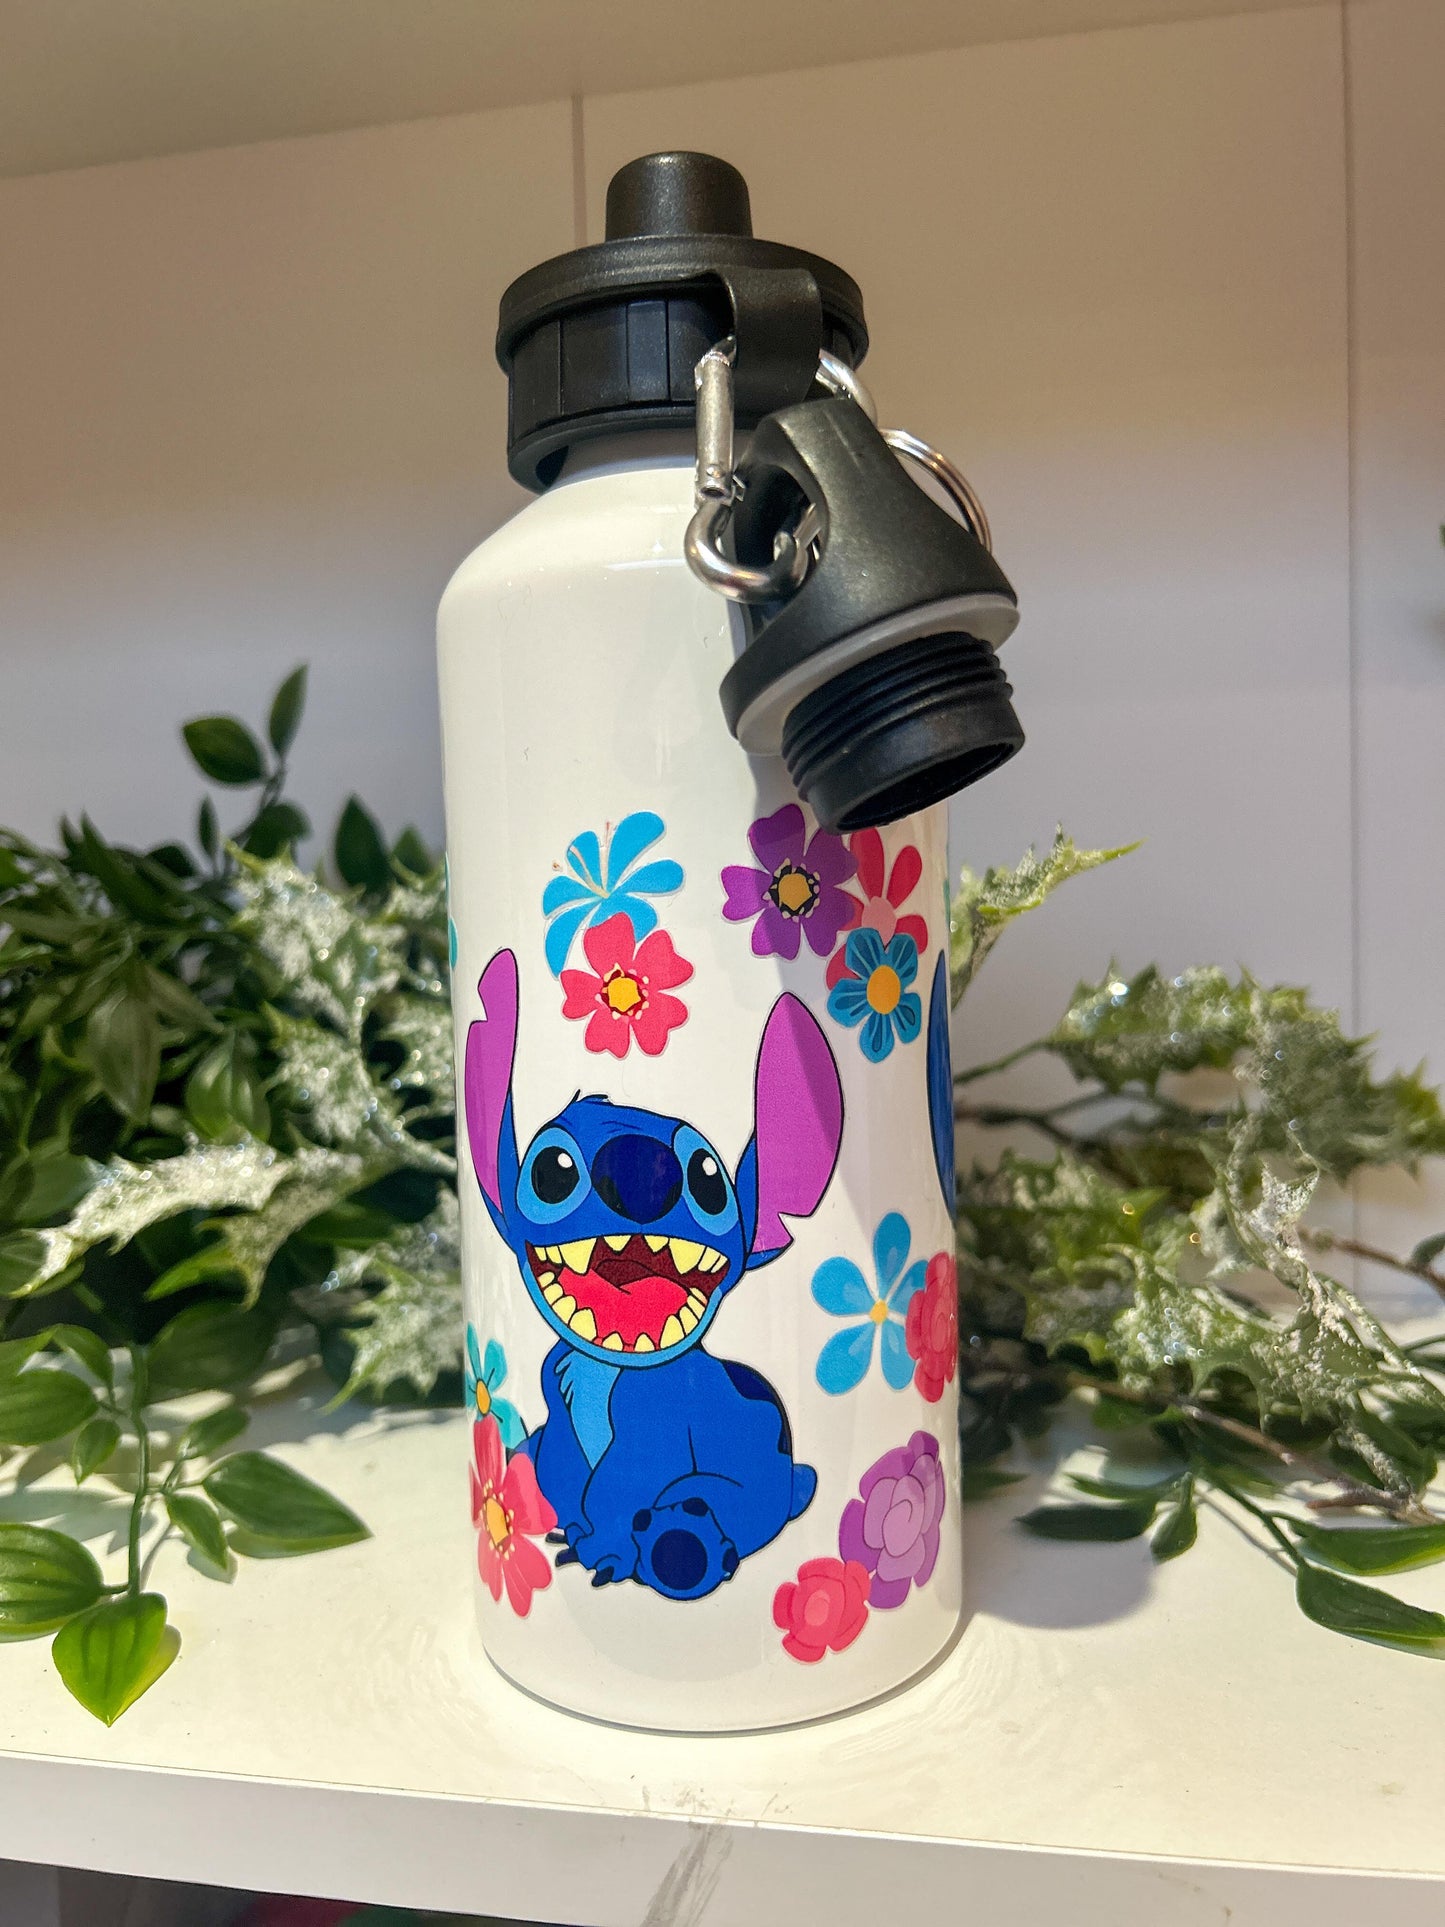 Personalised white aluminium water bottle - CHOOSE YOUR CHARACTER!!